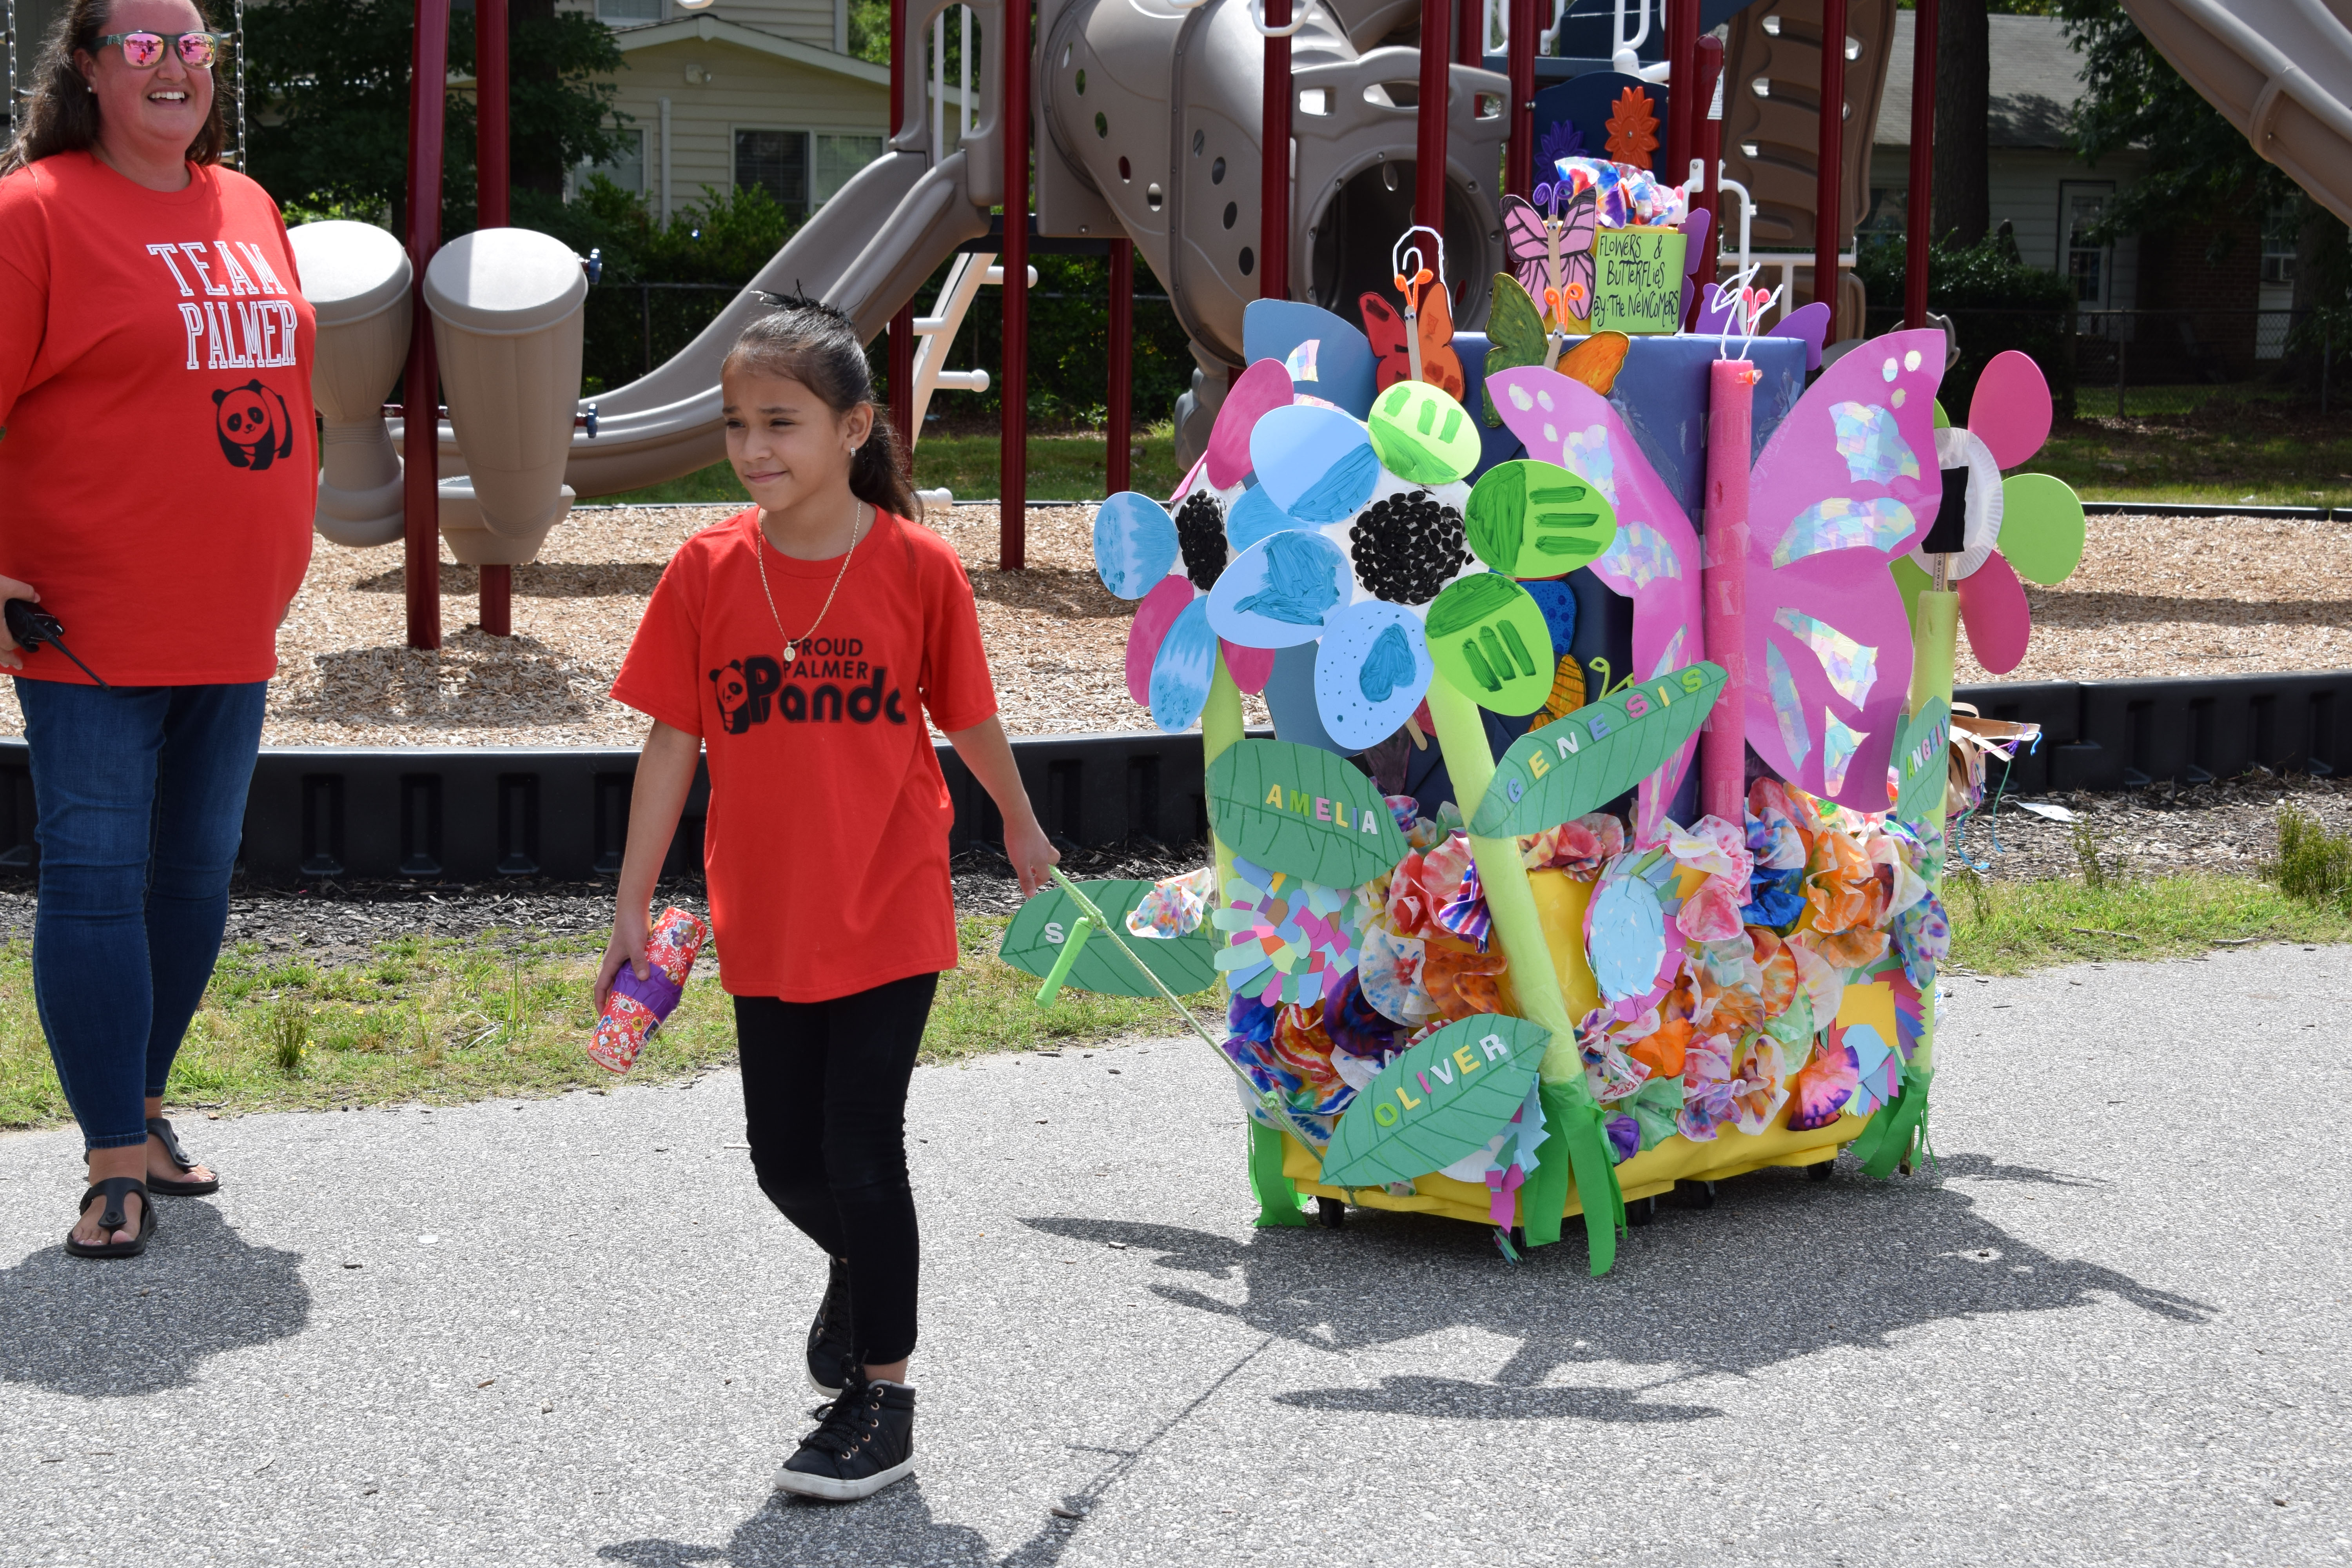 Students created floats for the parking lot parade honoring Palmer Elementary's 50th anniversary.